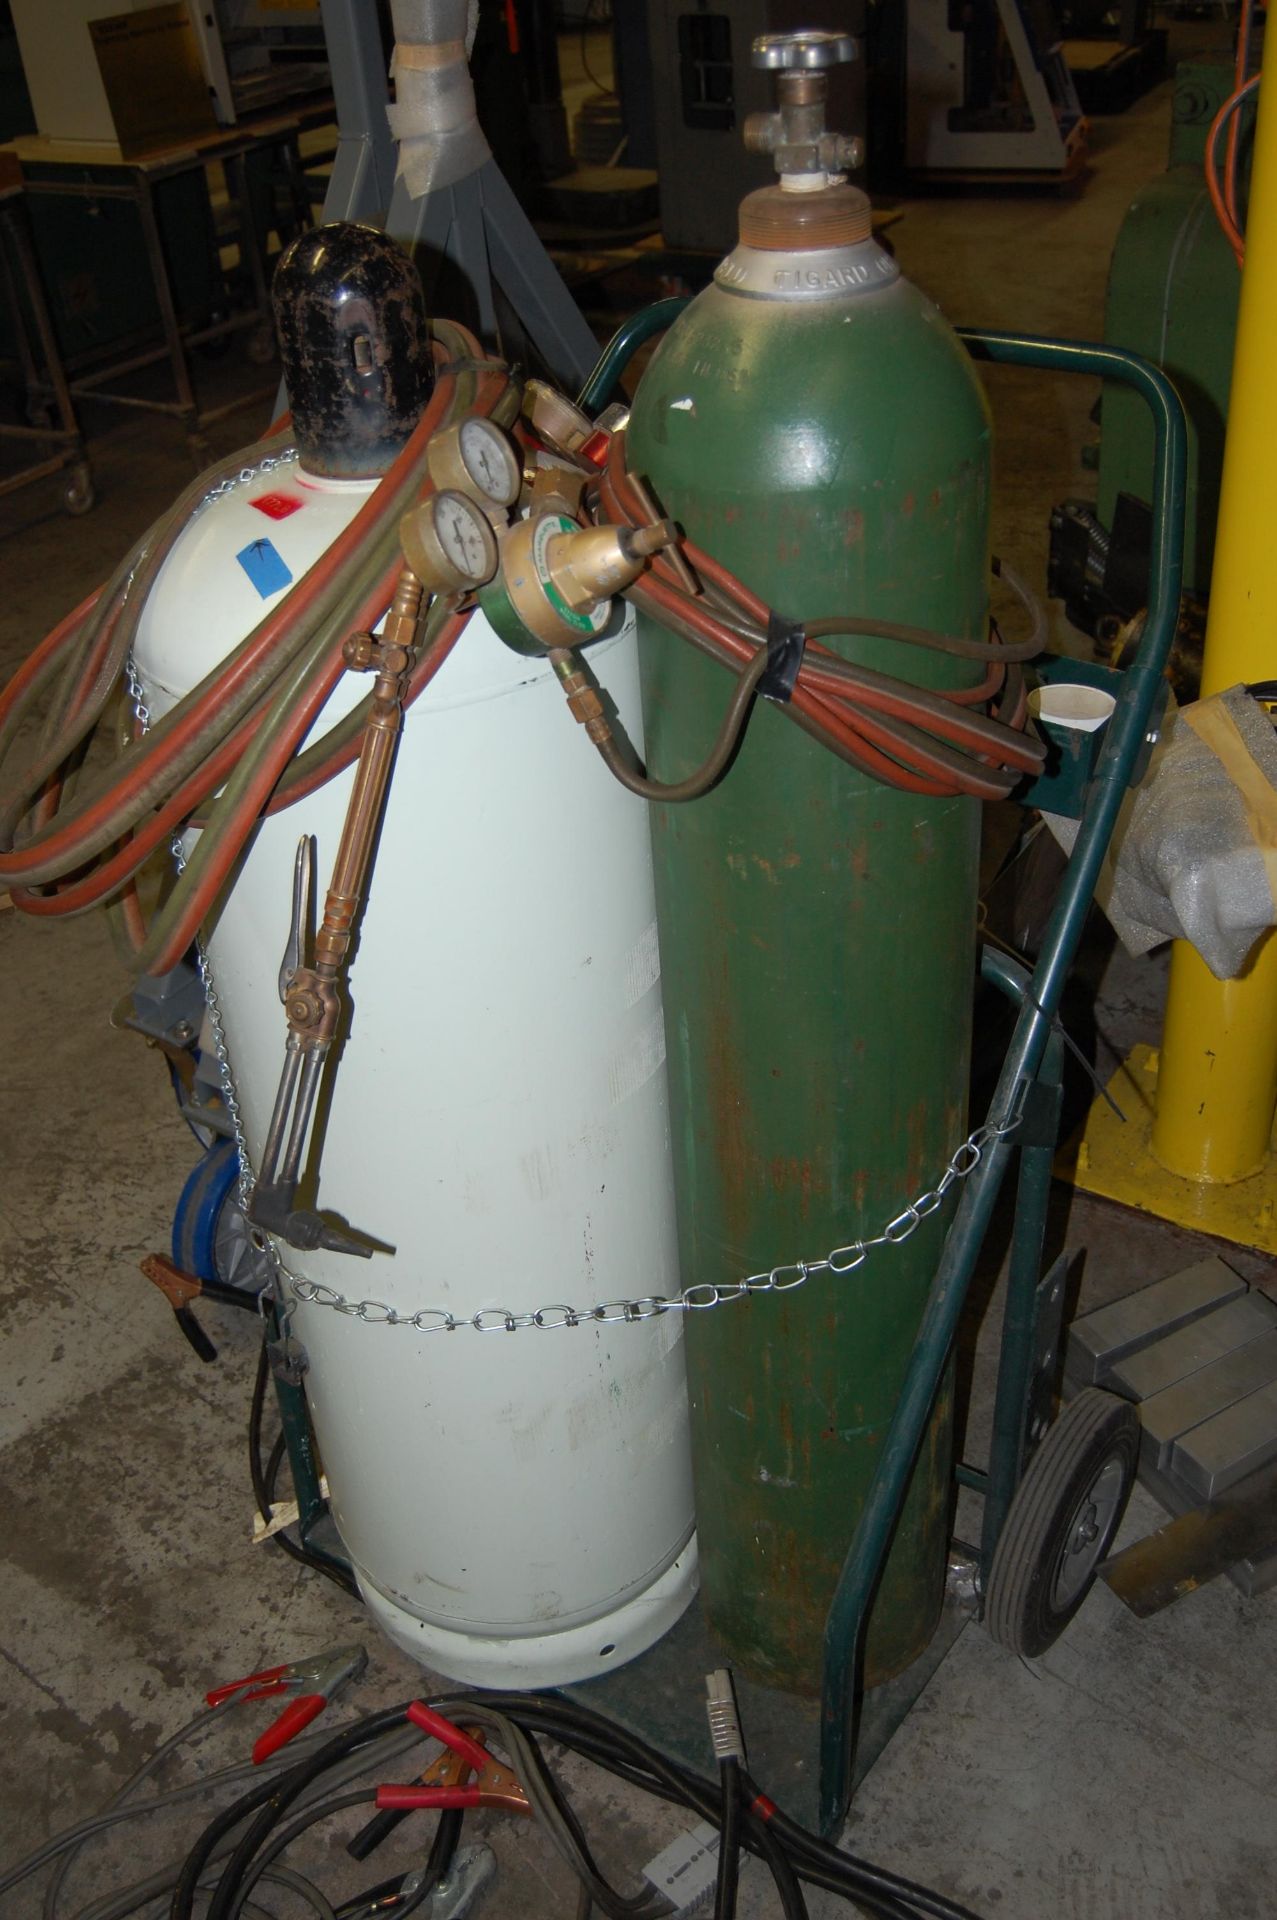 Oxygen/Propylene Cart with Two Tanks, Leads, Torch